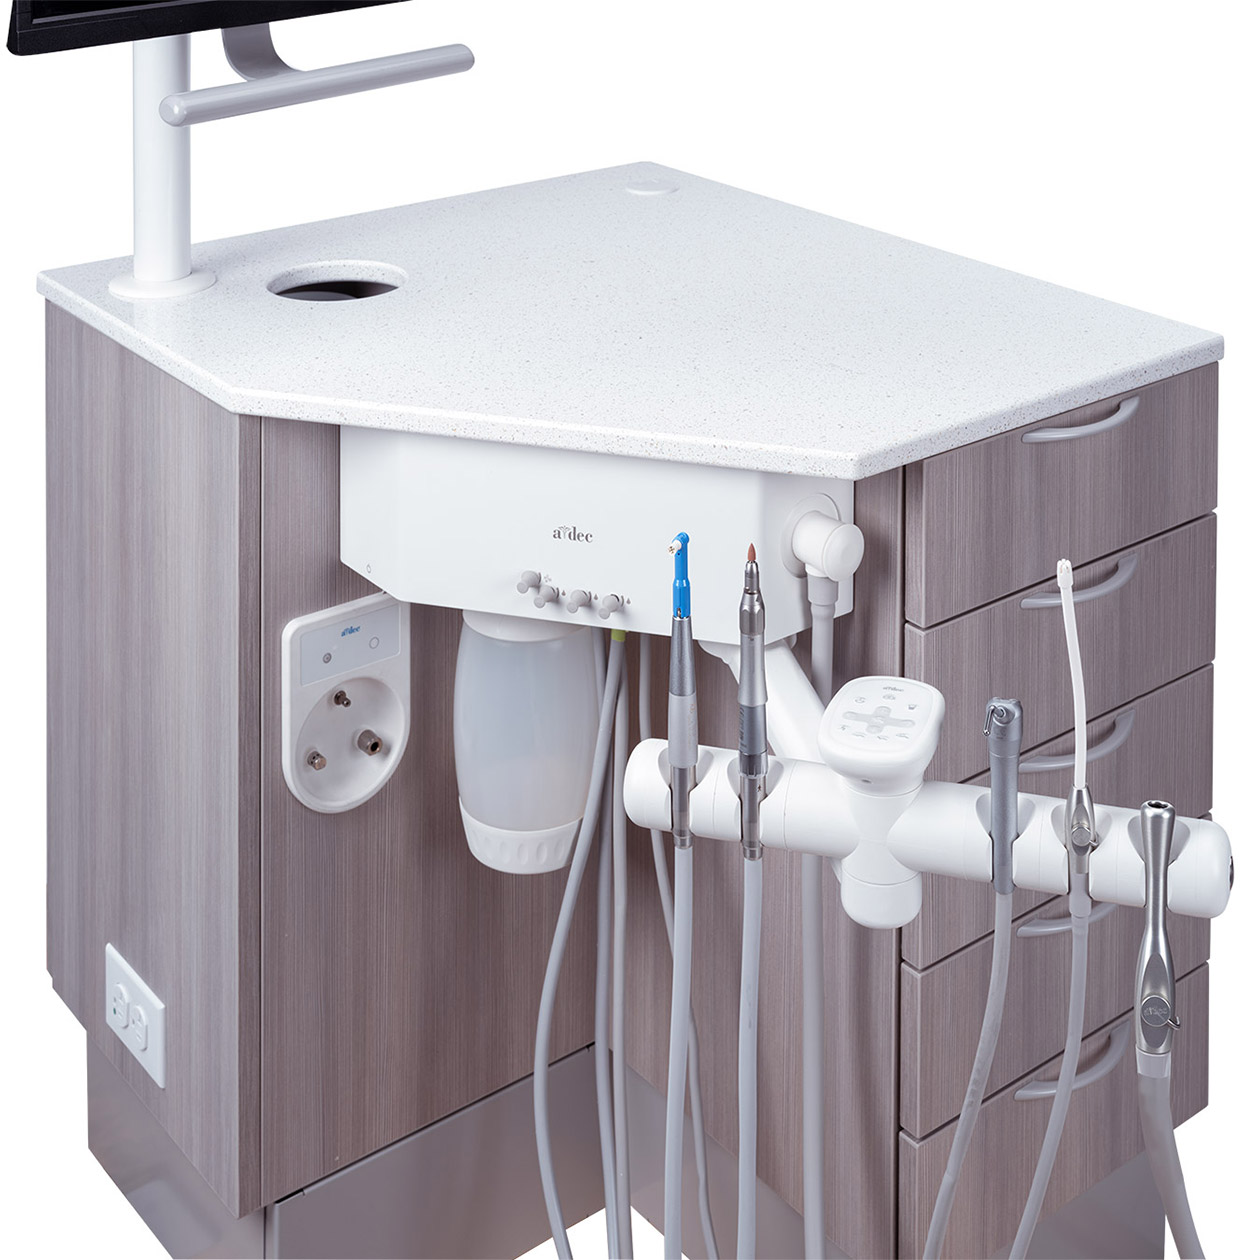 Delivery system on the A-dec Inspire 397 specialty workstation for orthodontics